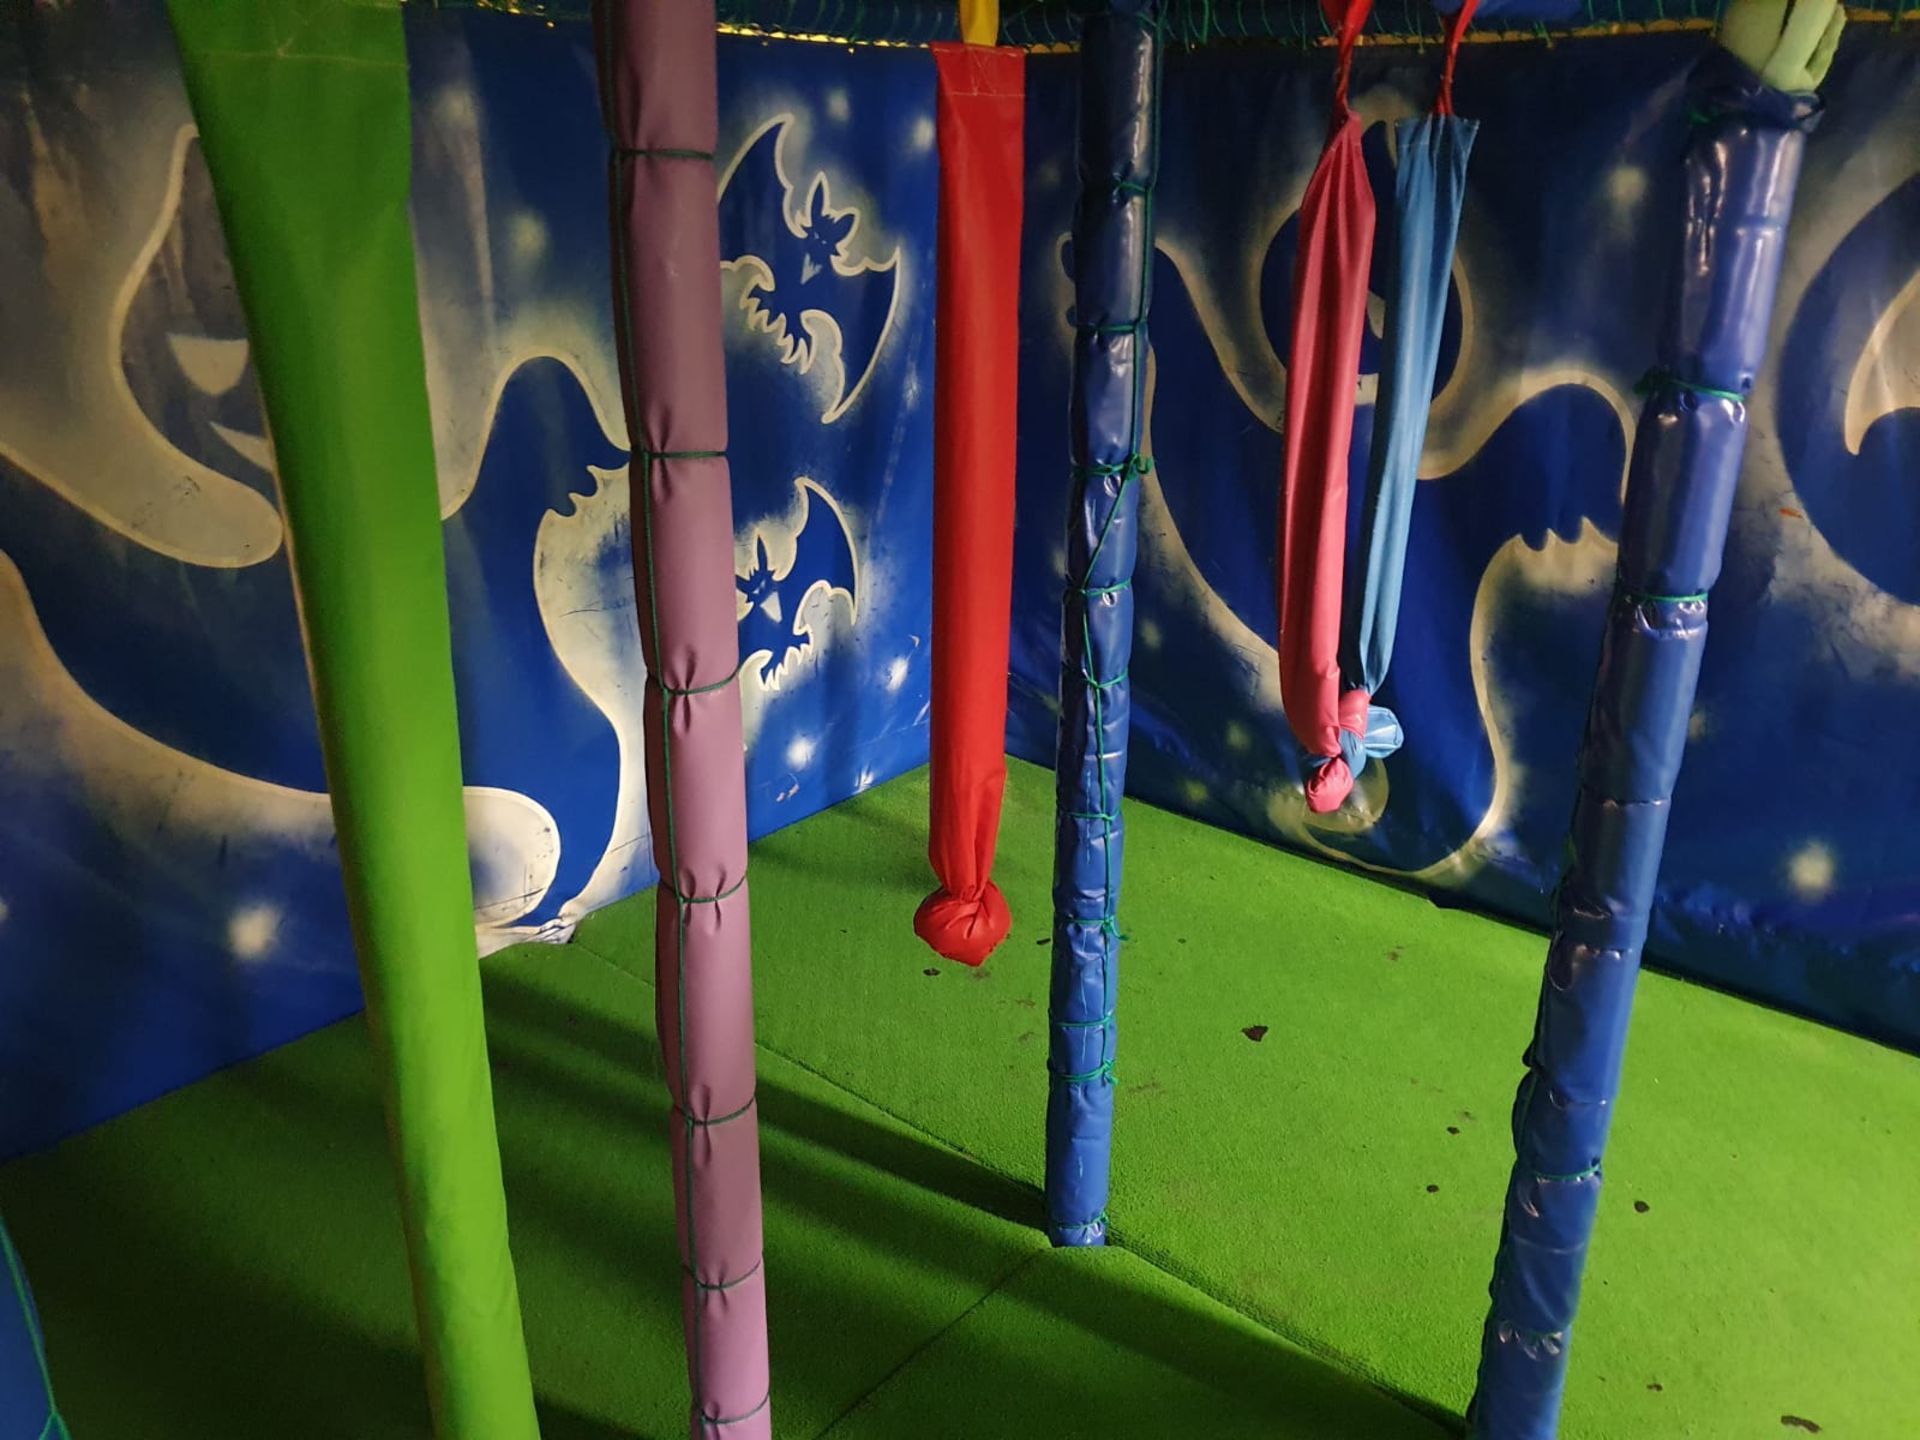 Bramleys Big Adventure Playground - Giant Action-Packed Playcentre With Slides, Zip Line Swings, - Image 116 of 128